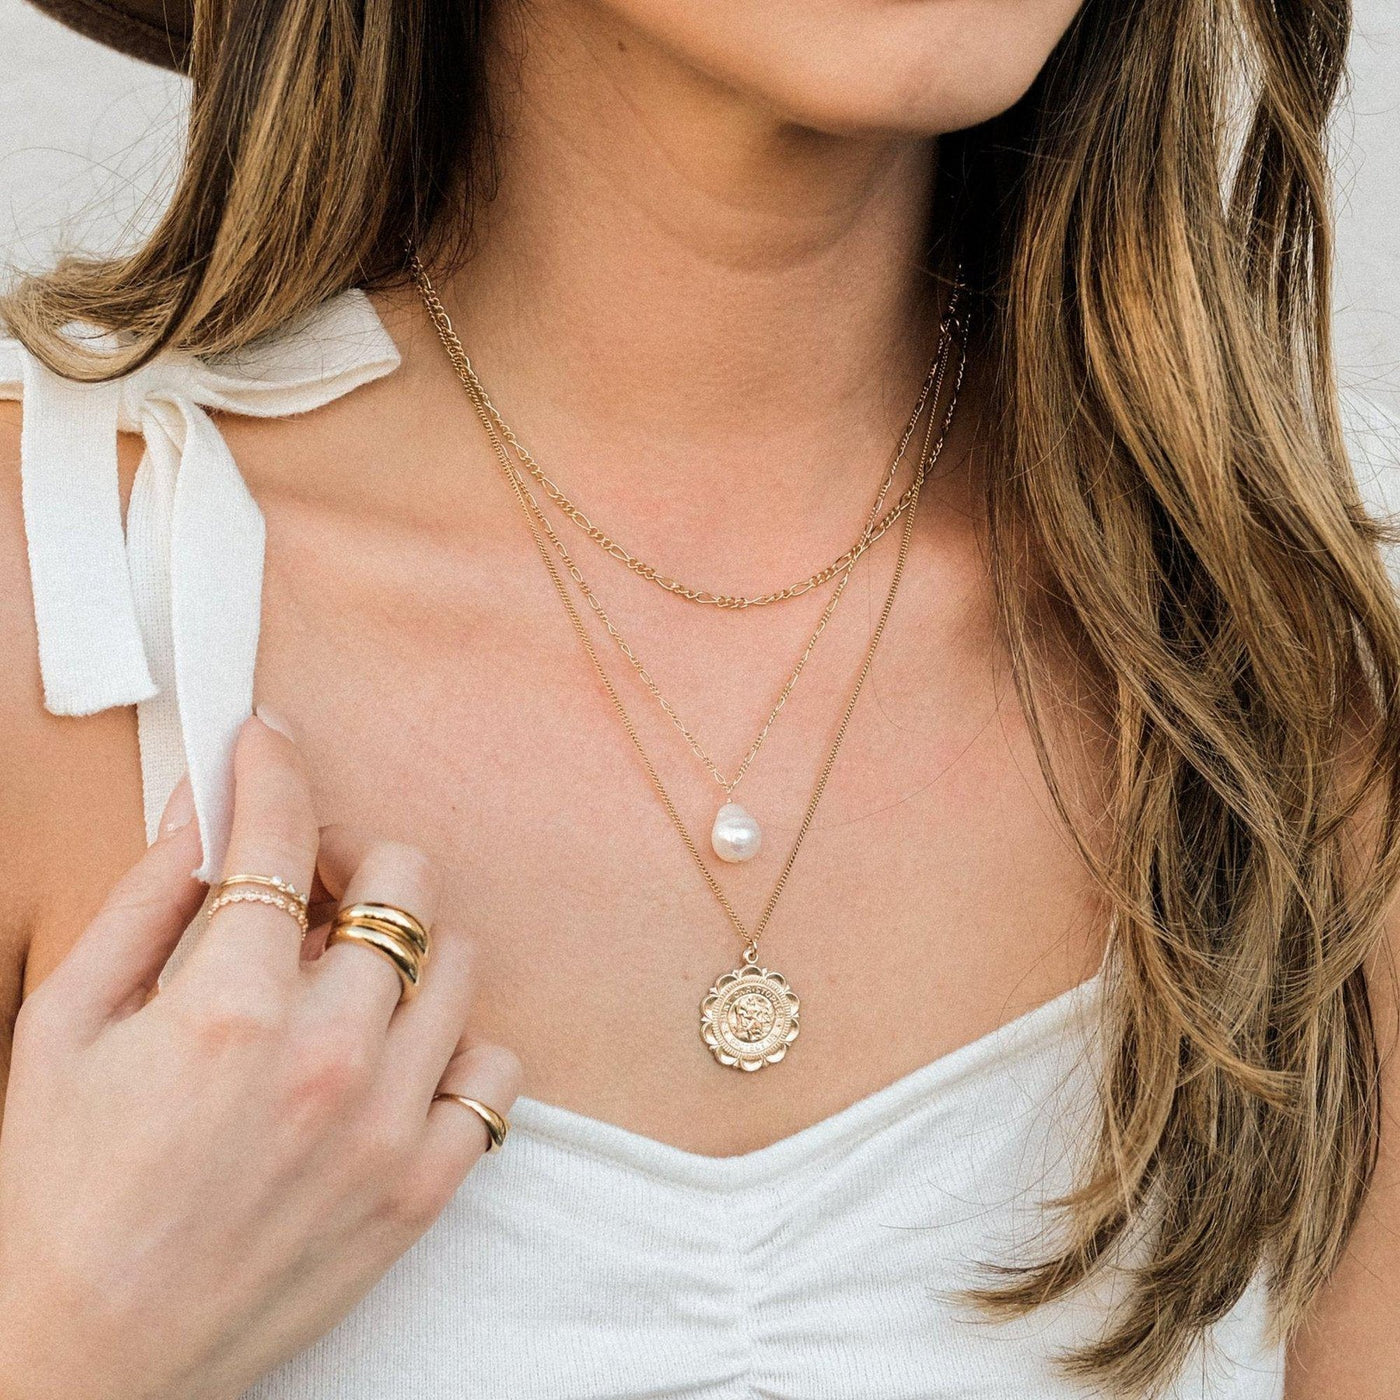 Traveler's Coin Necklace | Simple & Dainty